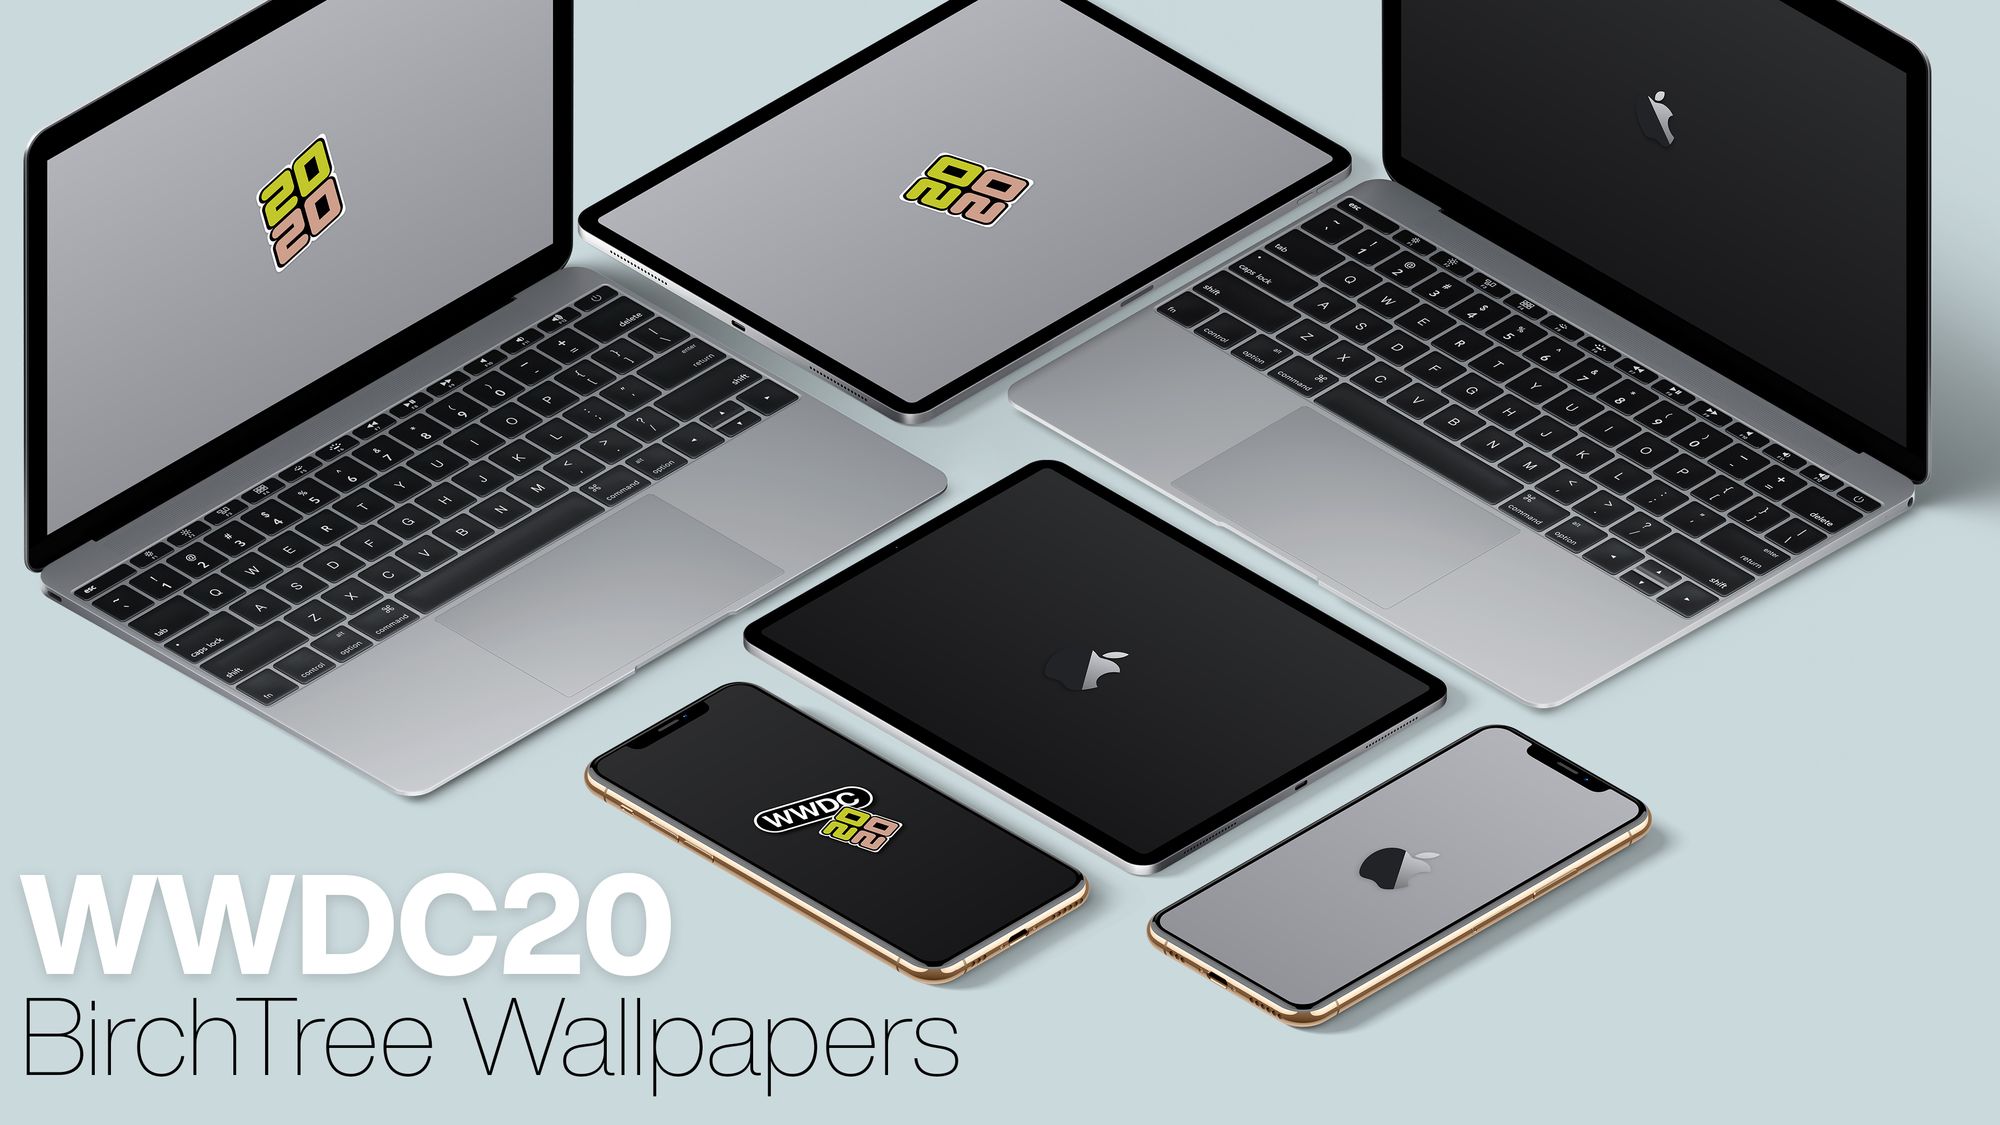 WWDC20 Wallpapers for iPhone, iPad, and Mac